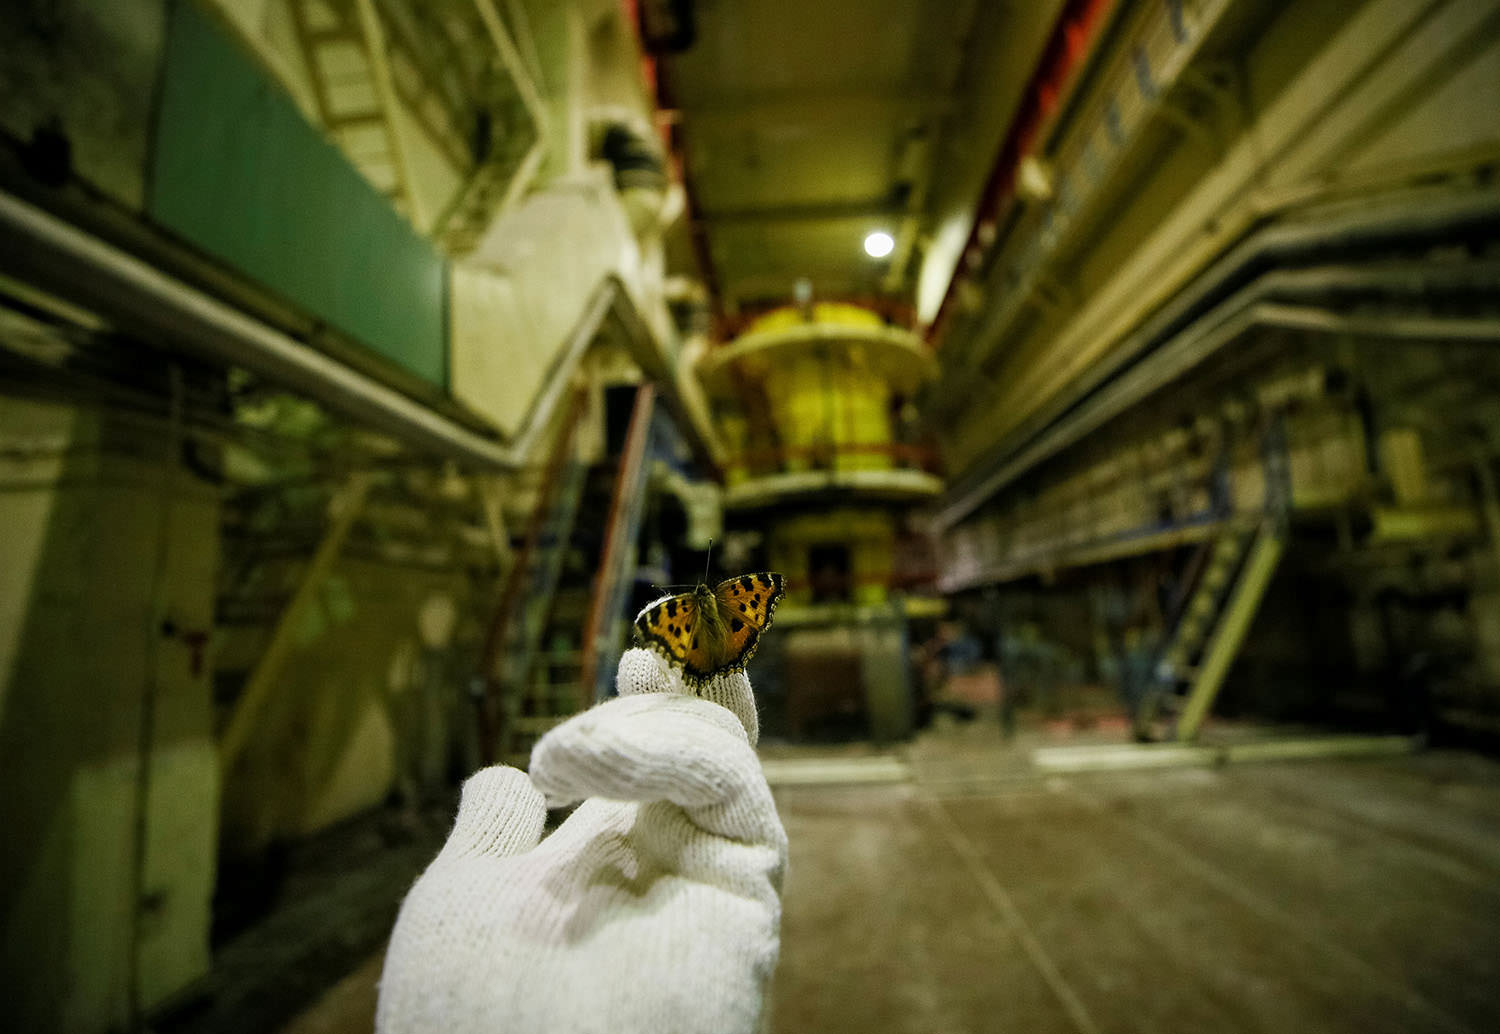 Chernobyl disaster butterfly lands on a workers glove in reactor 3 pump room